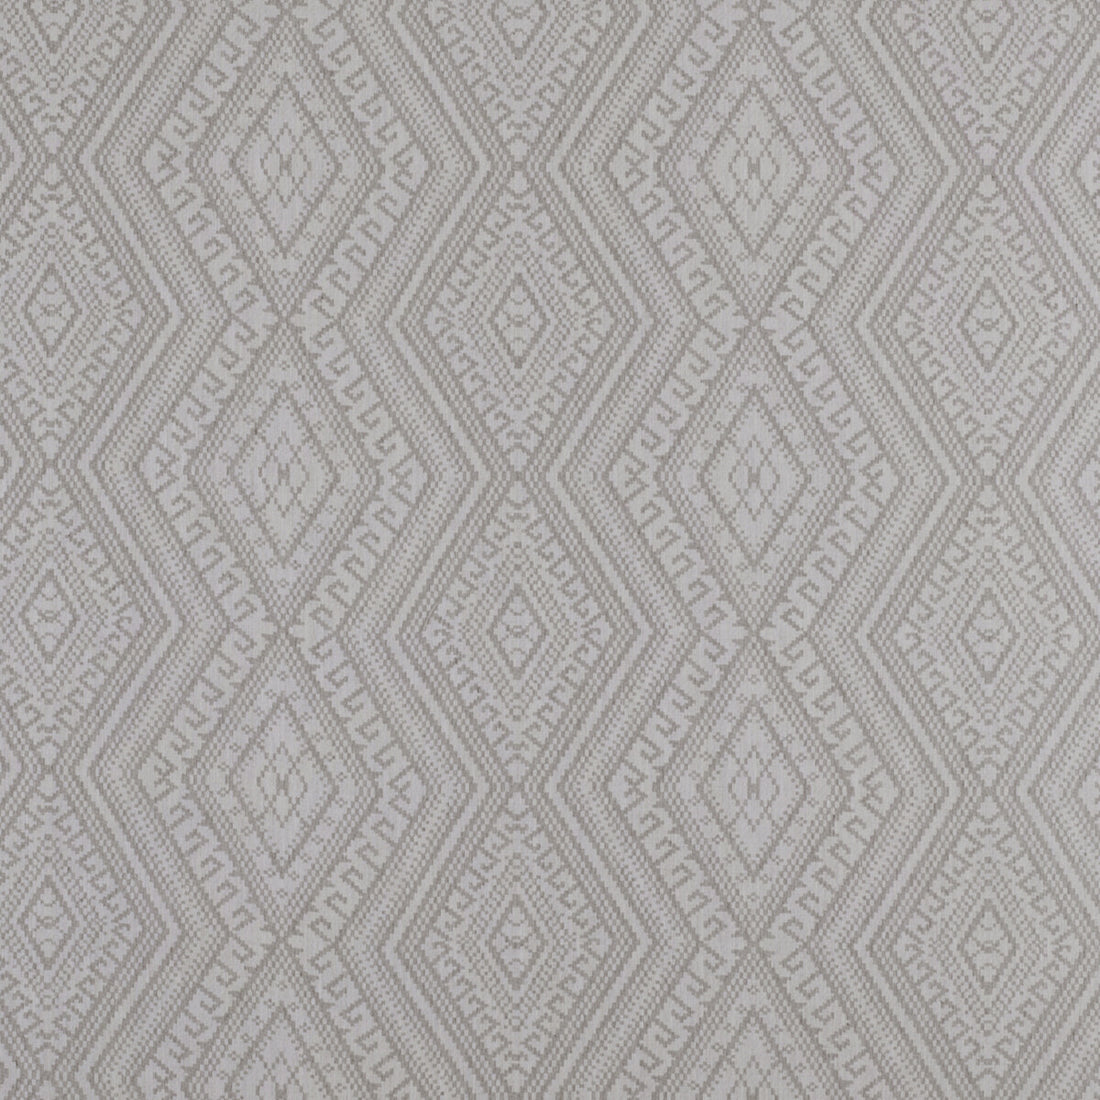 Estromboli fabric in piedra color - pattern GDT5313.004.0 - by Gaston y Daniela in the Tierras collection